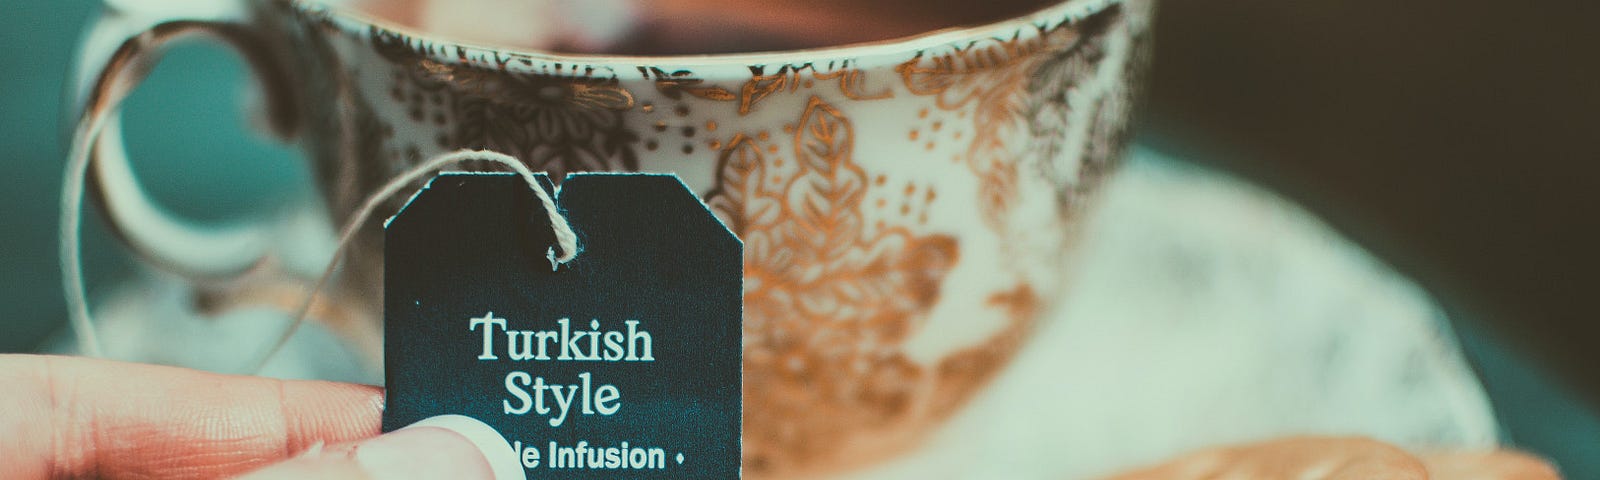 A cup of “Turkish Style” tea in a bone china teacup. Two Rich Tea biscuits rest on the saucer.